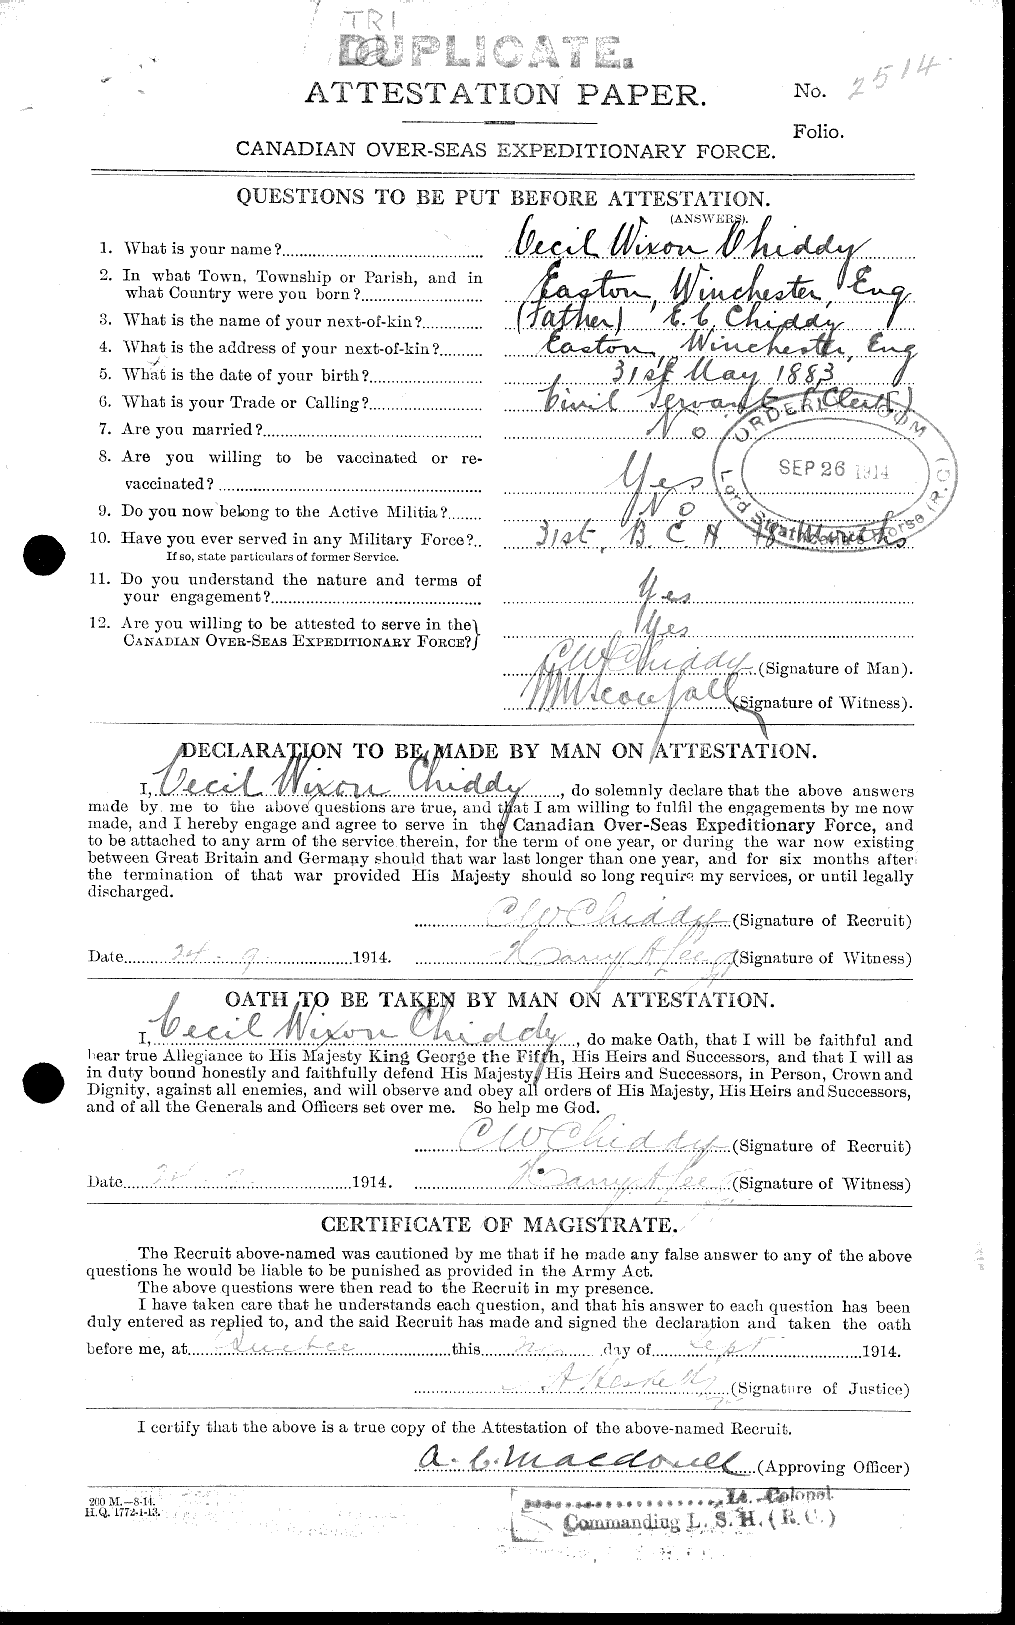 Personnel Records of the First World War - CEF 020306a